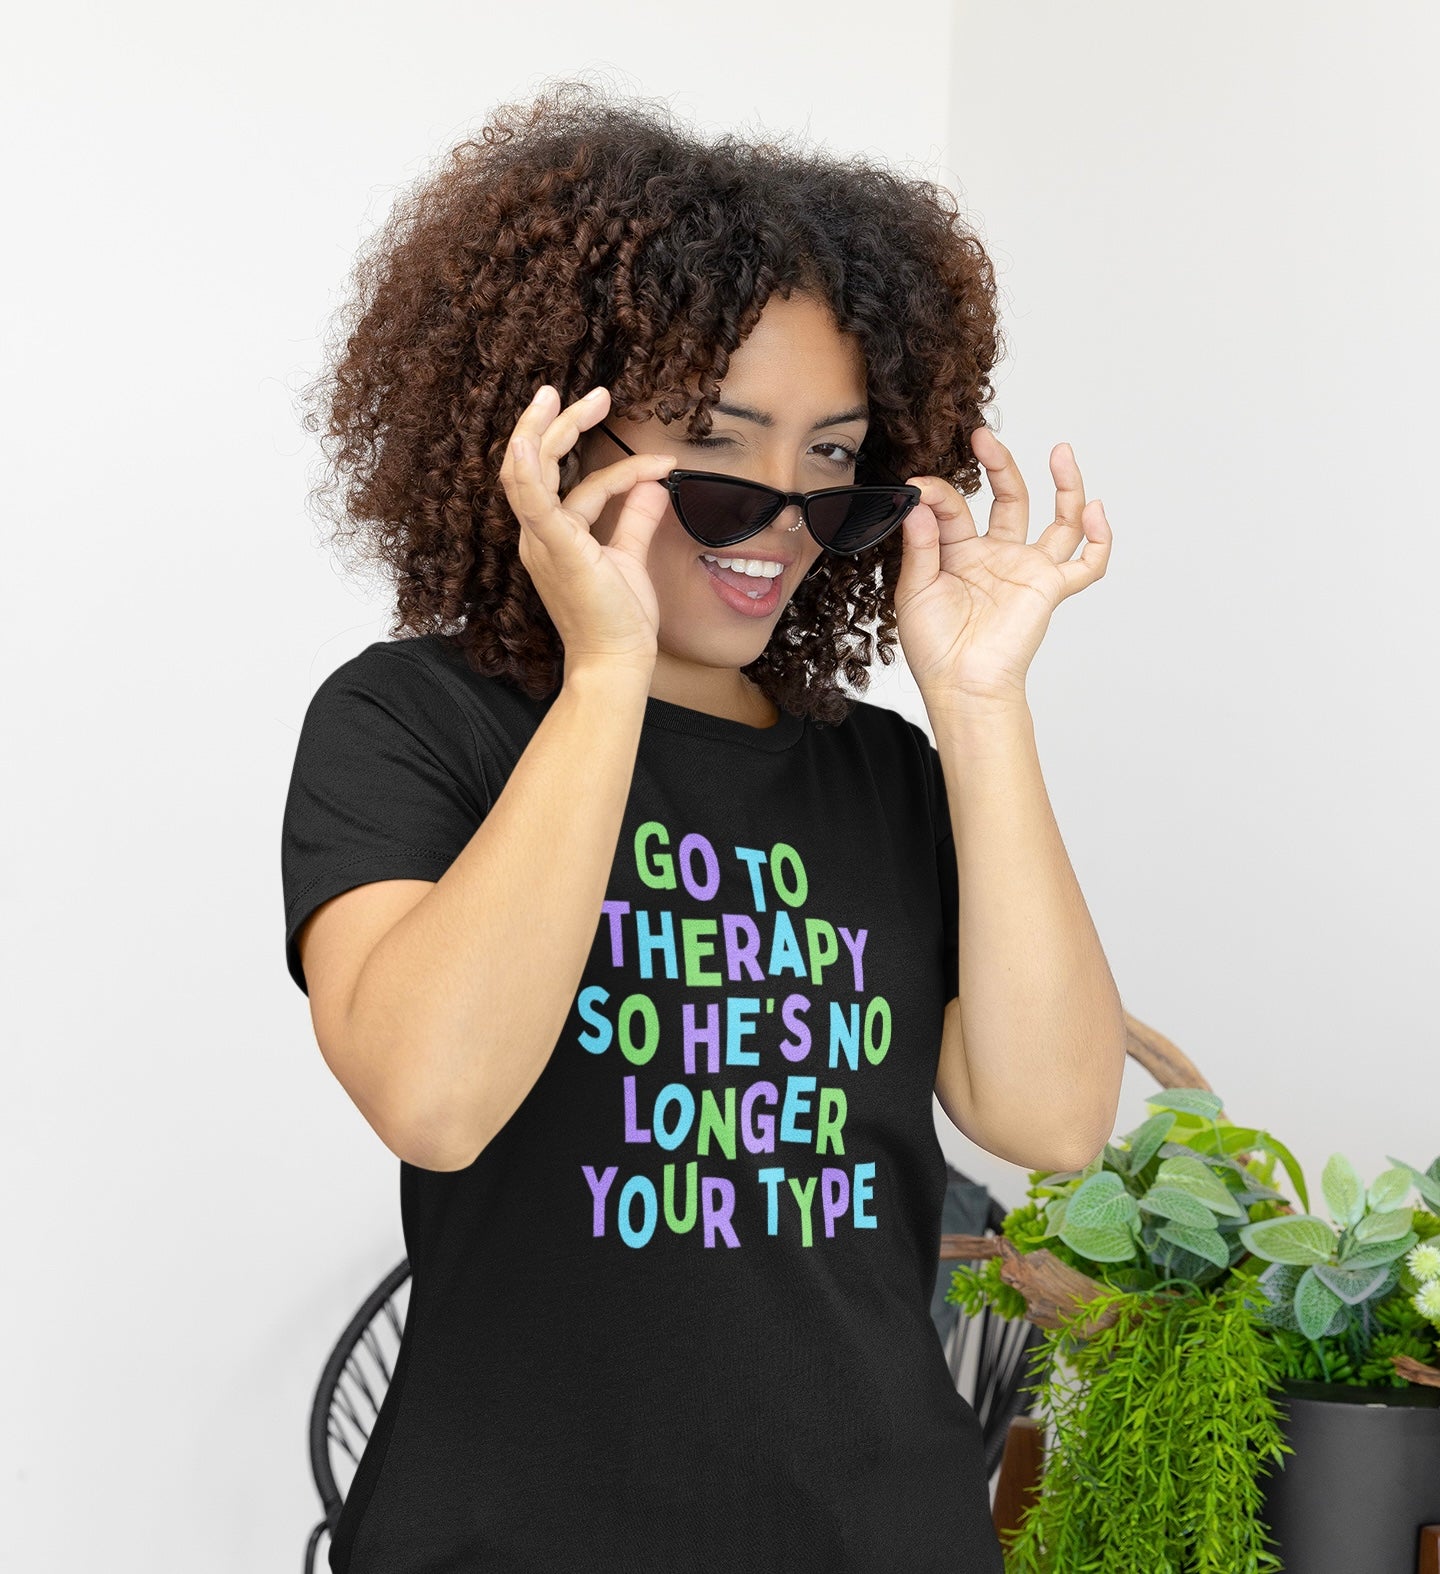 Go To Therapy So He’s No Longer Your Type Unisex Feminist t-shirt - Shop Women’s Rights T-shirts - Feminist Trash Store - Women’s oversized T-shirt